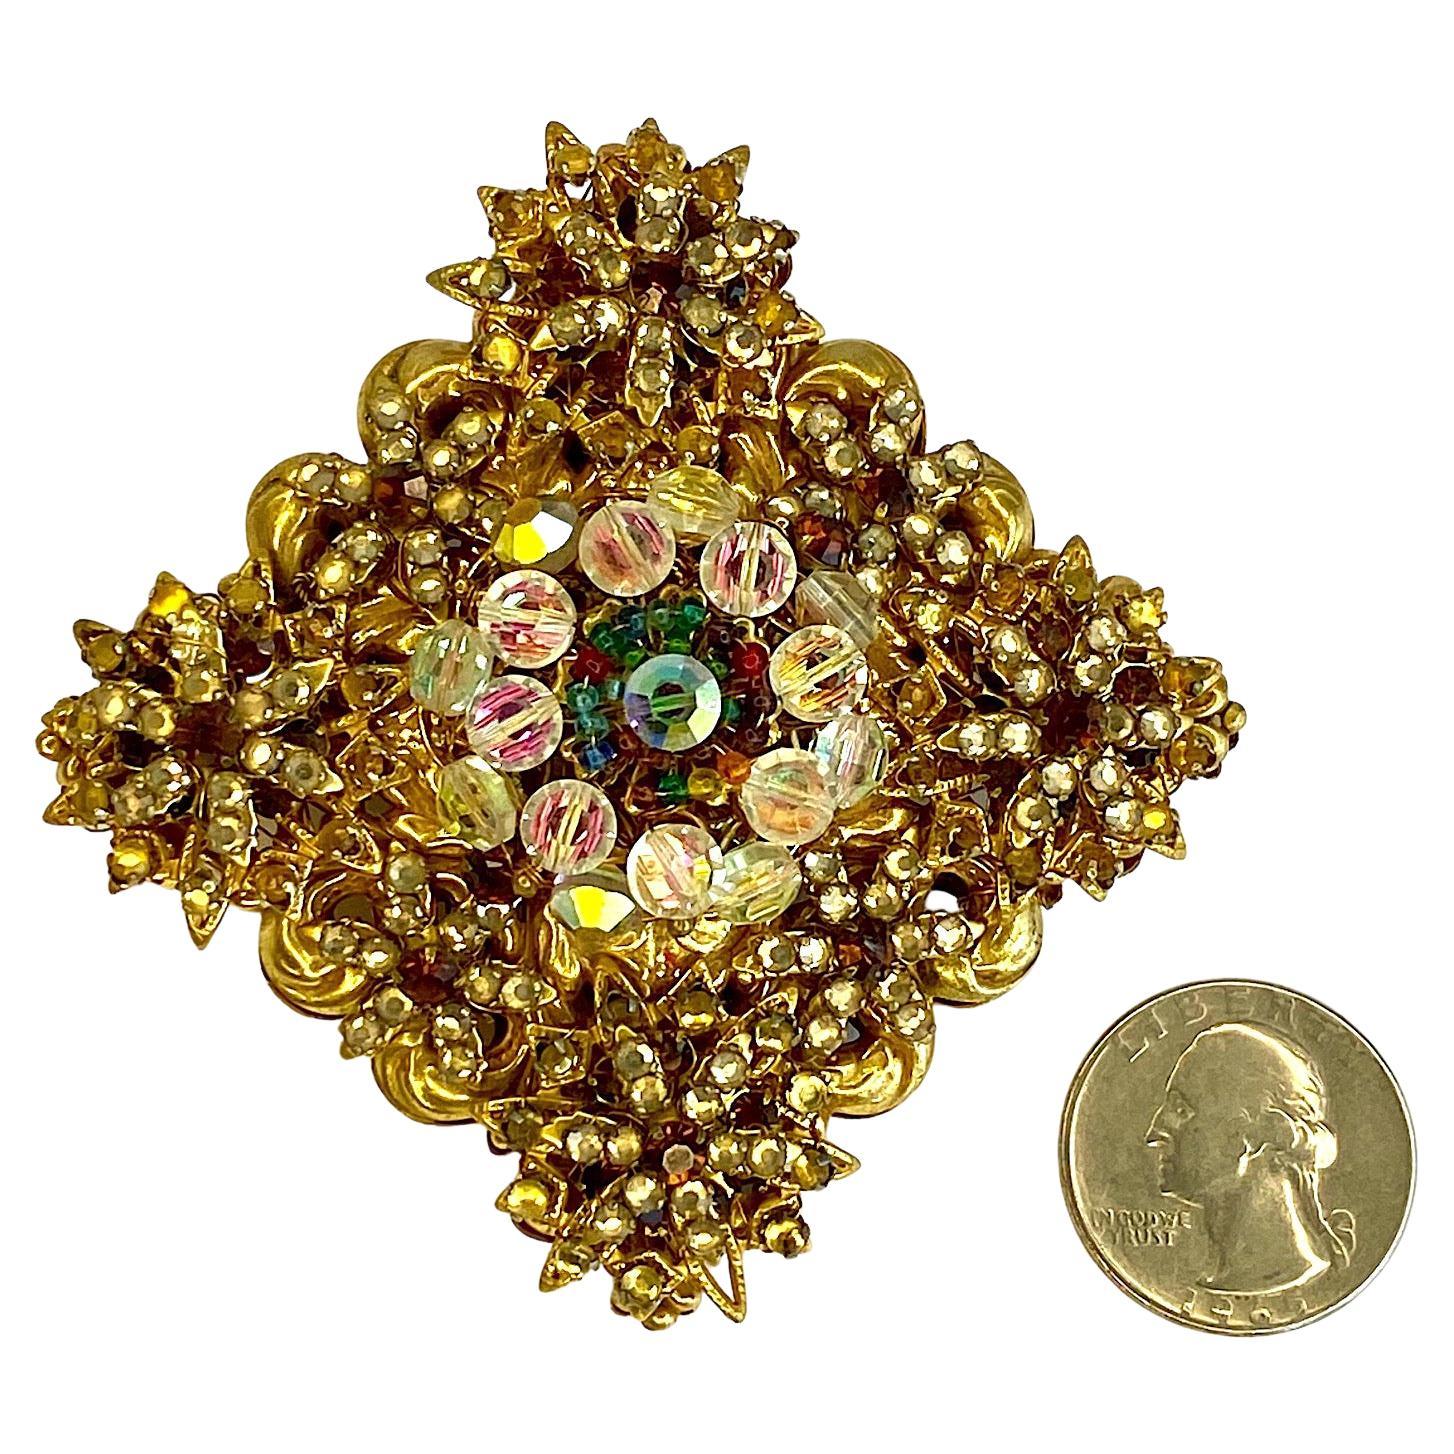 Presented is a lovely brooch by Stanley Hagler from the 1980s. Hand made of carefully threaded individually set clear flat back rhinestones, aurora borealis rhinestones, purple rhinestones, iridescent crystal beads and small red and green seed